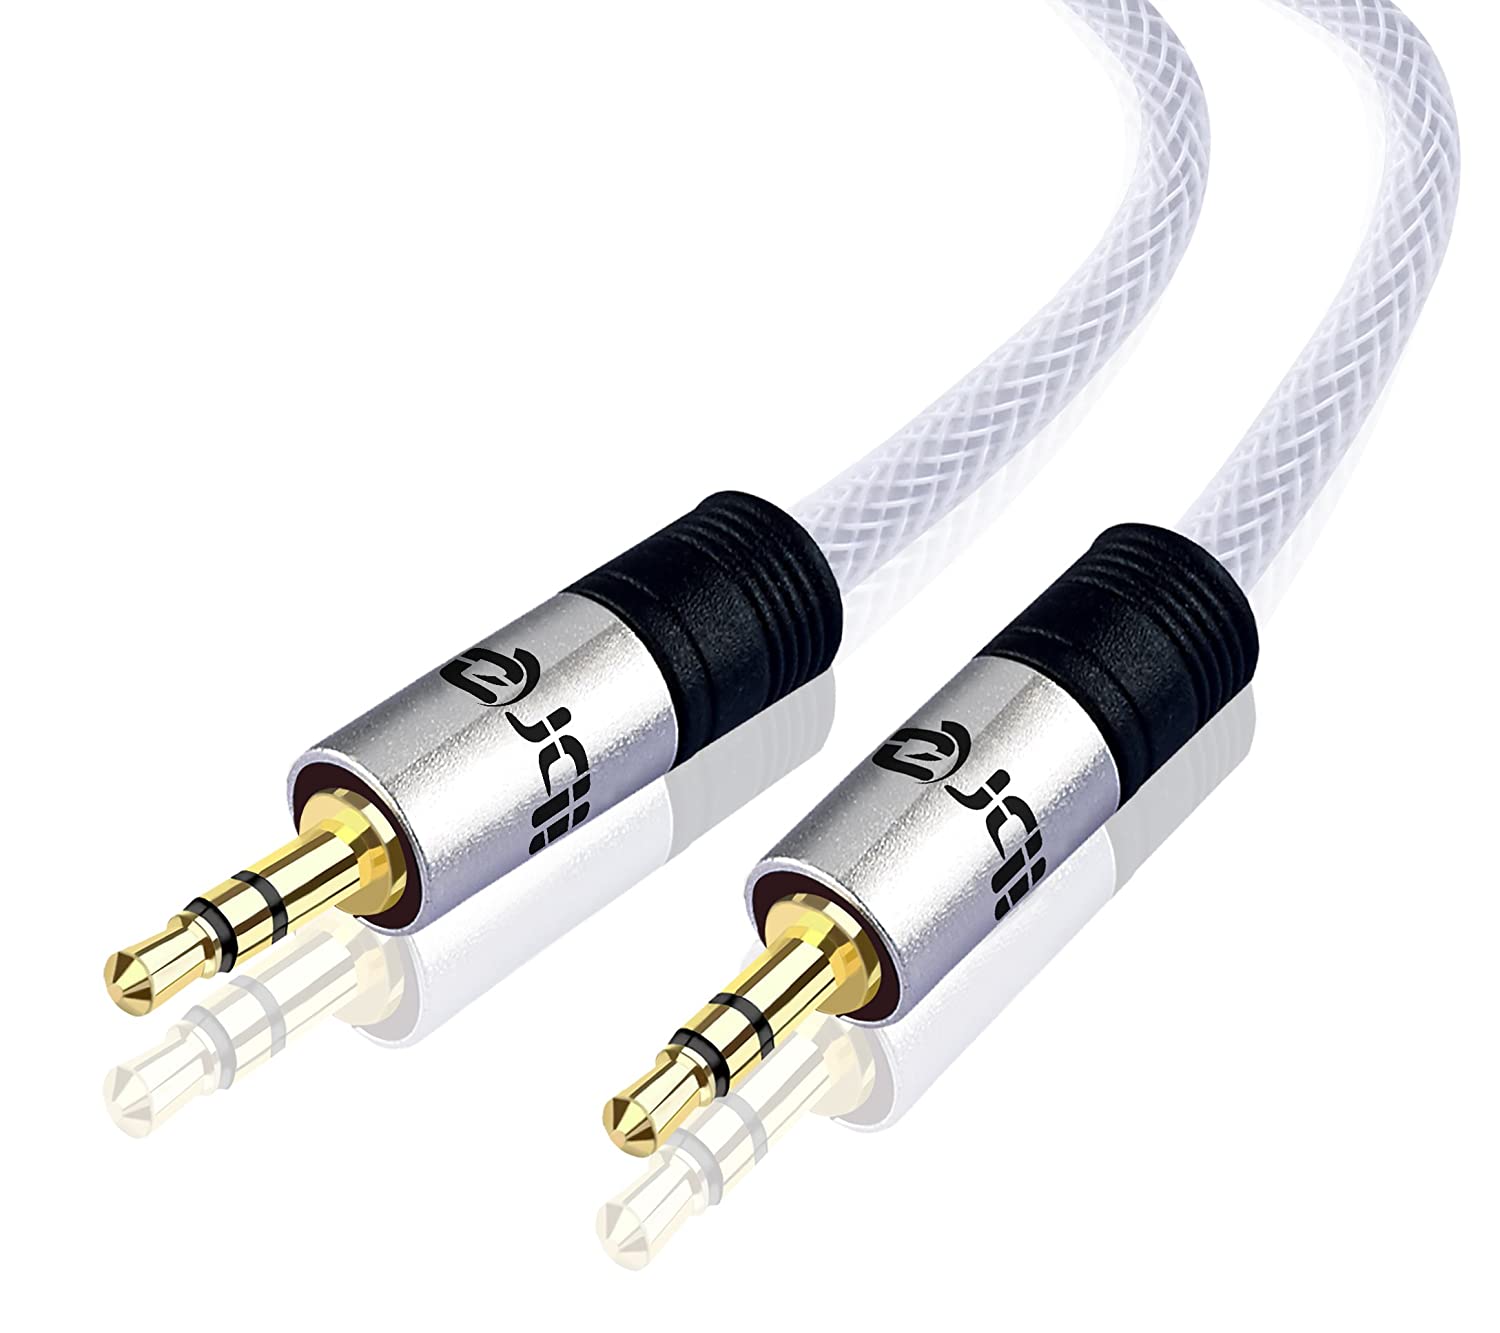 Understanding The Principles Of Variations Of The Jack To Jack Cables